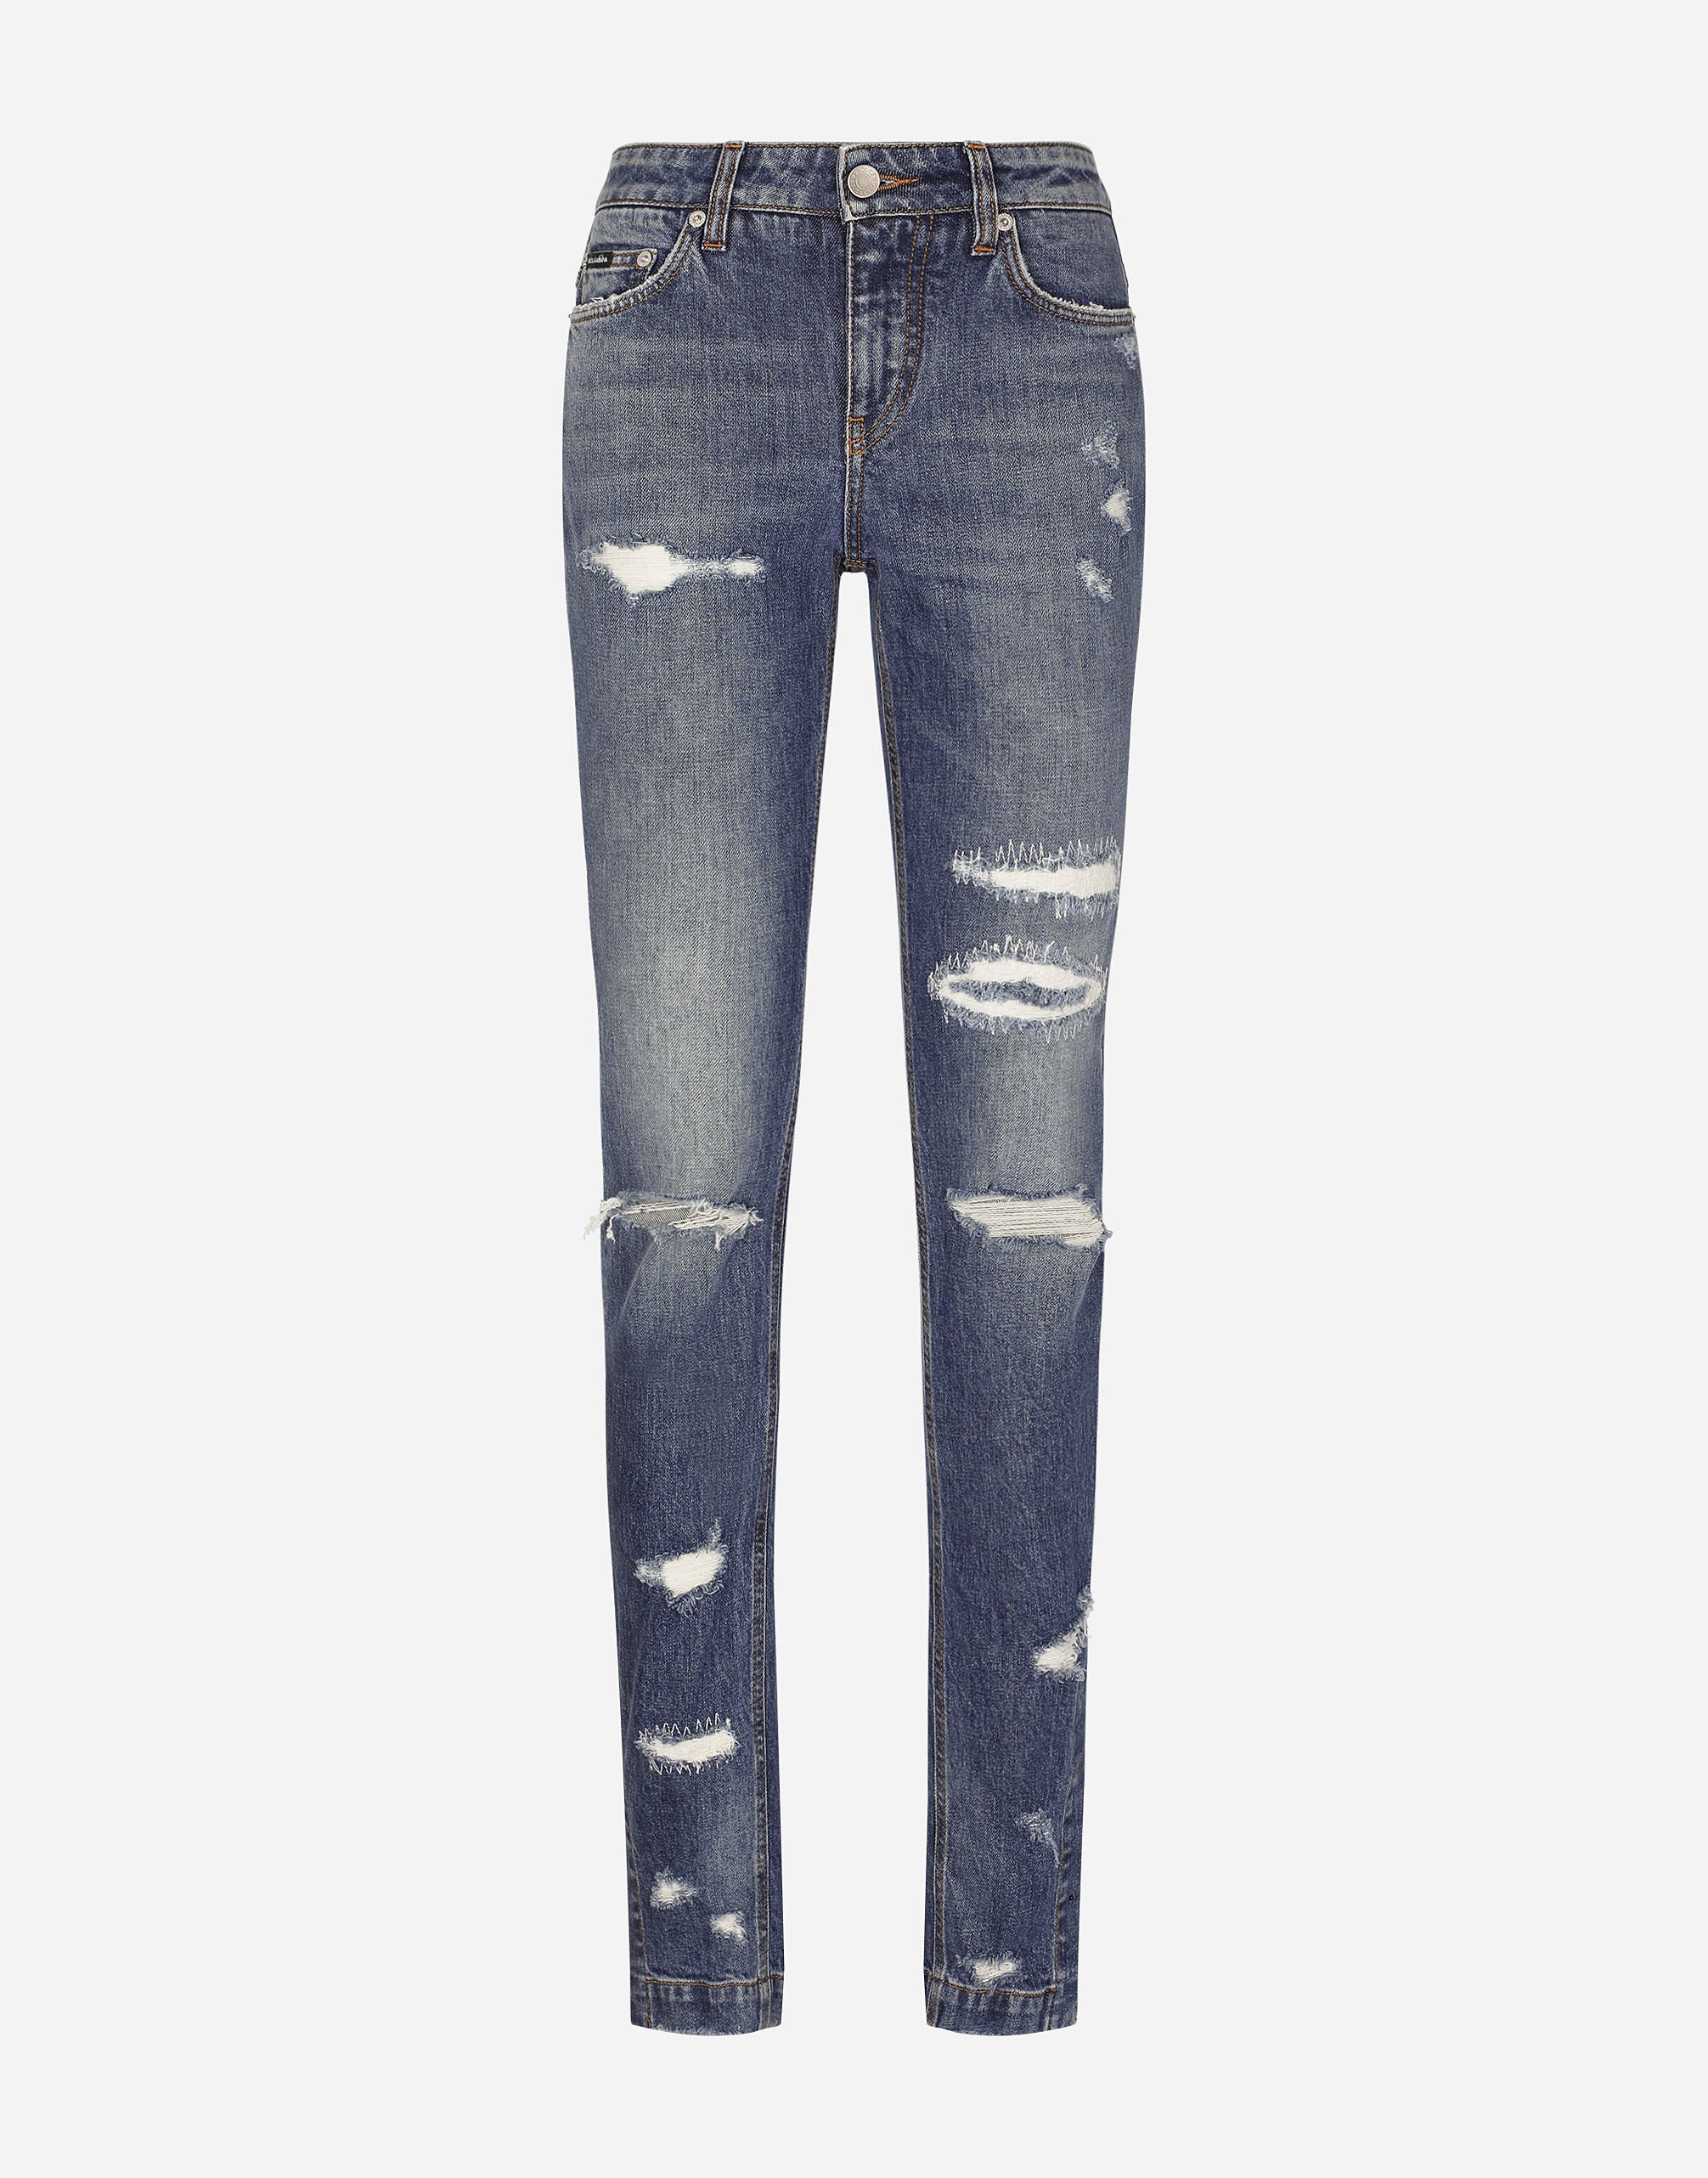 Dolce&Gabbana Girly jeans with ripped details Black F6DKITFU1AT